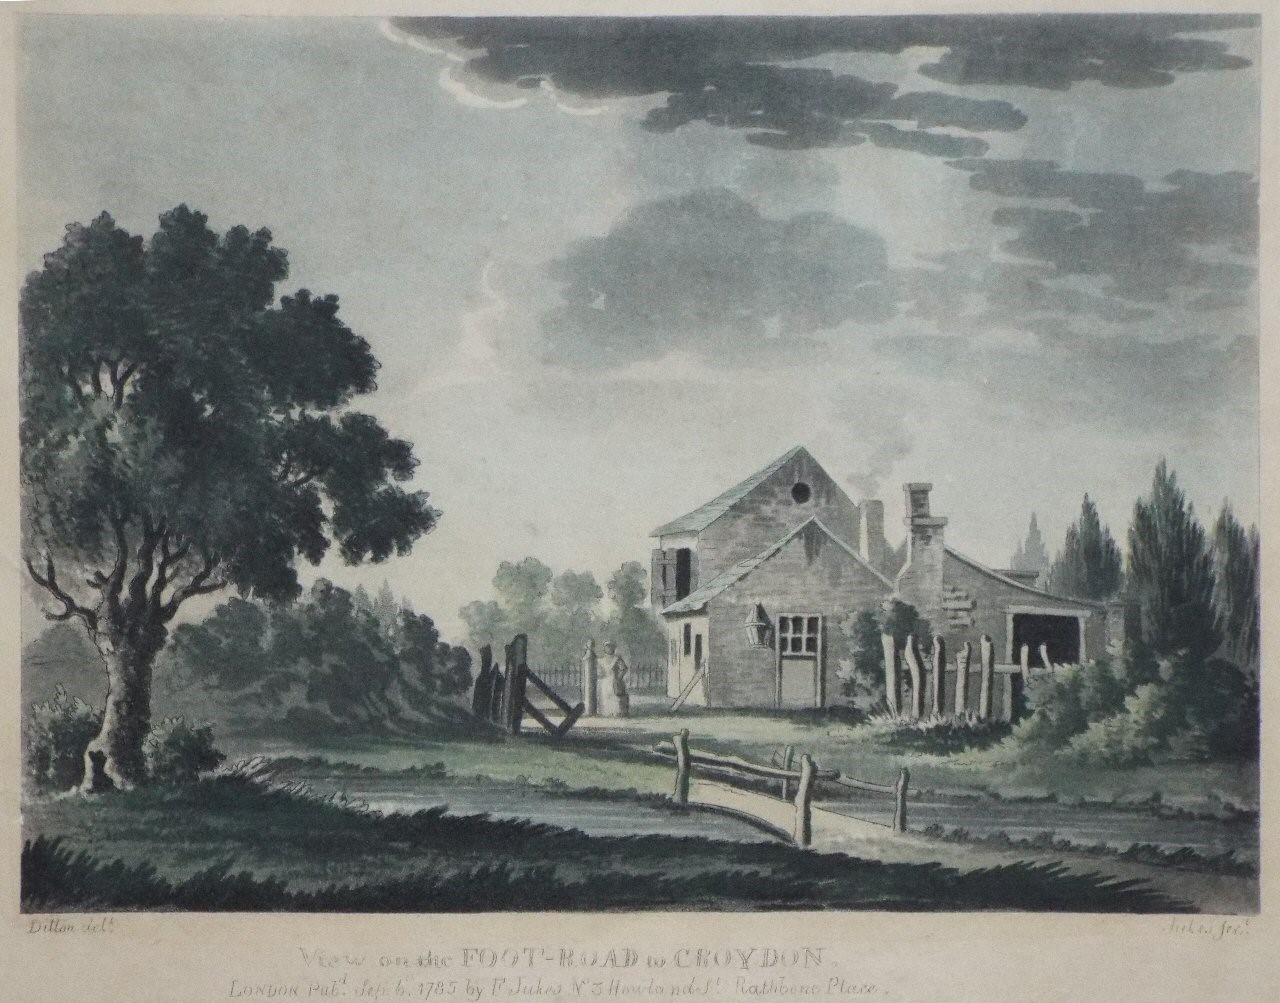 Aquatint - View on the Foot-Road to Croydon. - 